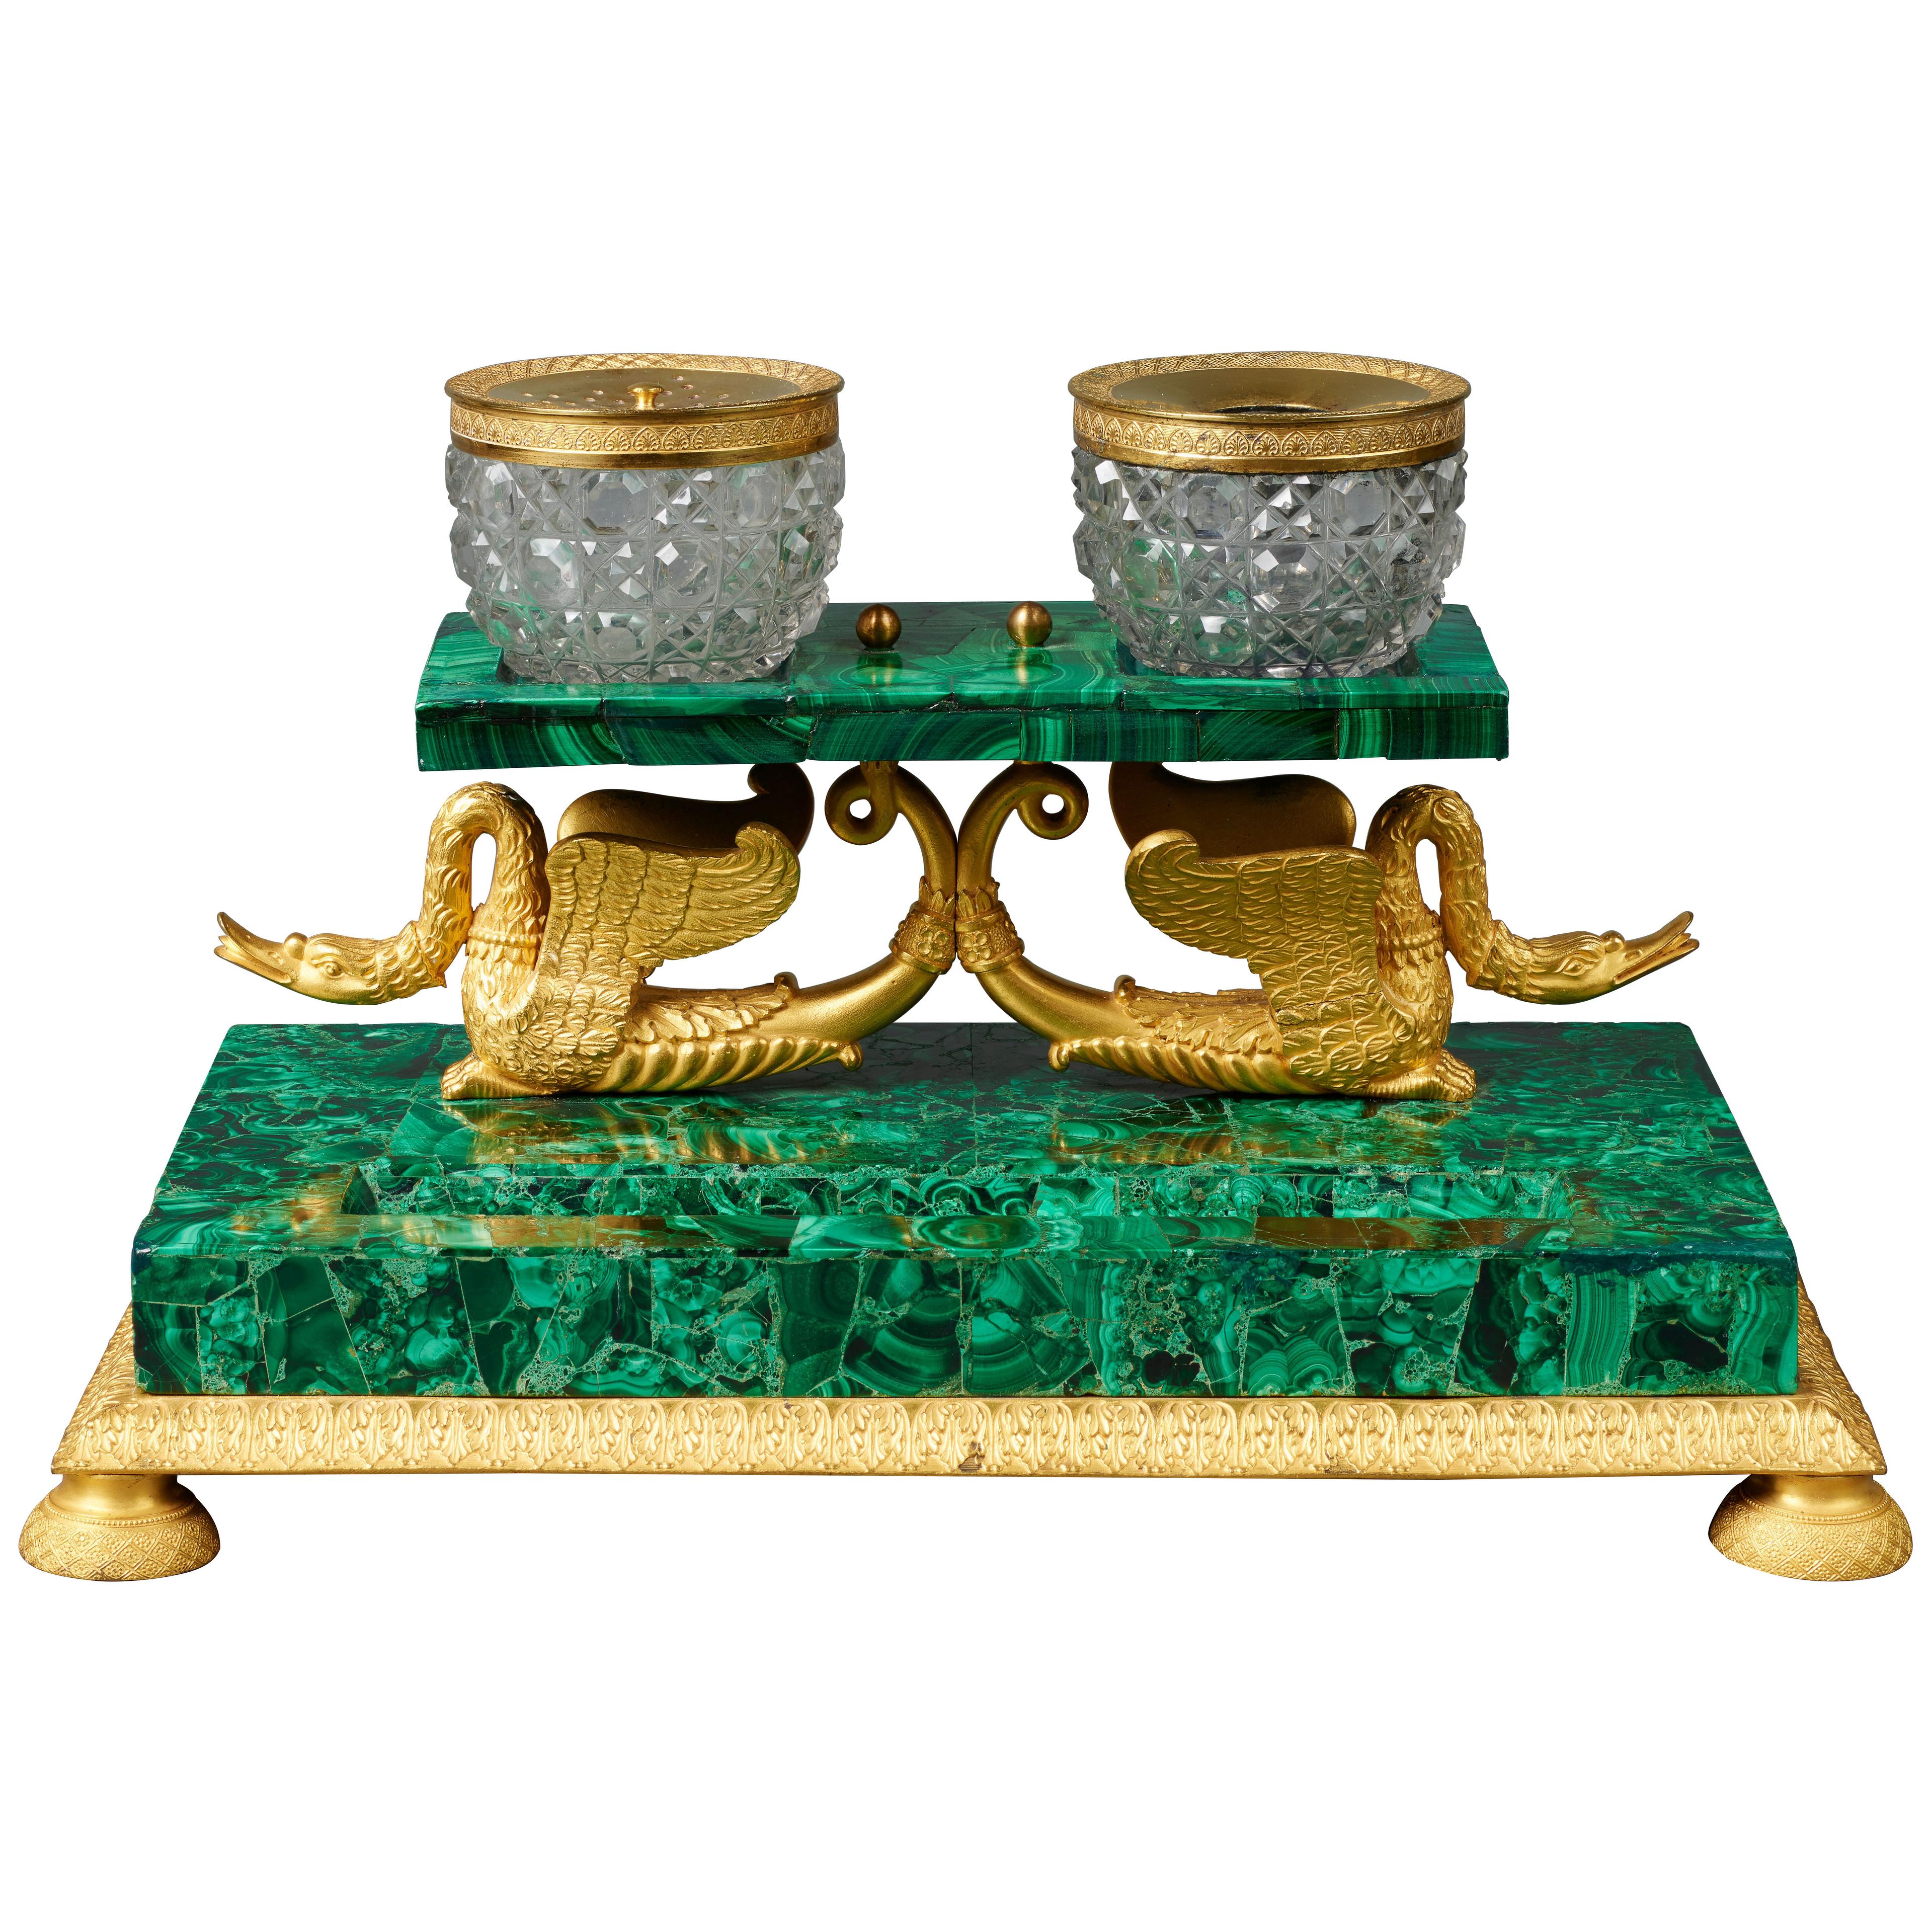 Early 19th Century Russian Empire Malachite and Ormolu Inkstand Encrier Swans